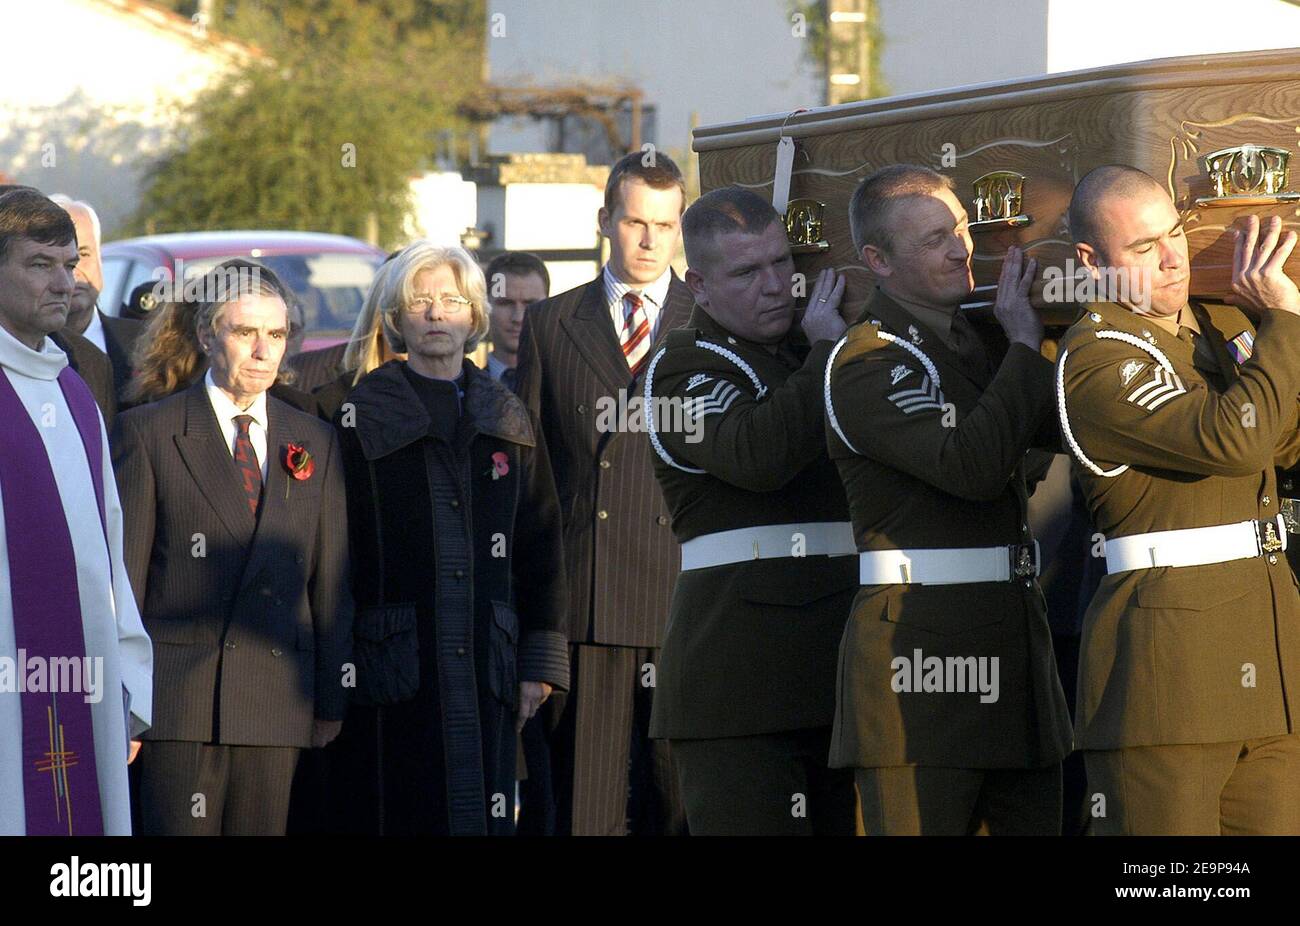 Funerals of Lieutenant Tom Tanswell, of the Royal Artillery, in the small village of Sainte Livrade-sur-lot , south of France on November 14, 2006. Tanswell, 27, was killed last October 27,outside Shaibah Logistics Base near the city of Basra, Iraq, and his death takes the number of British service personnel who have died since the start of hostilities to 120. Tom's parents, Victoria and Brian Tanswell, live in France since 2003 and their son was buried in the family grave located in the local cemetery. The releigious ceremony was conducted by priests Philippe d'Halluin et John Hennessy with F Stock Photo